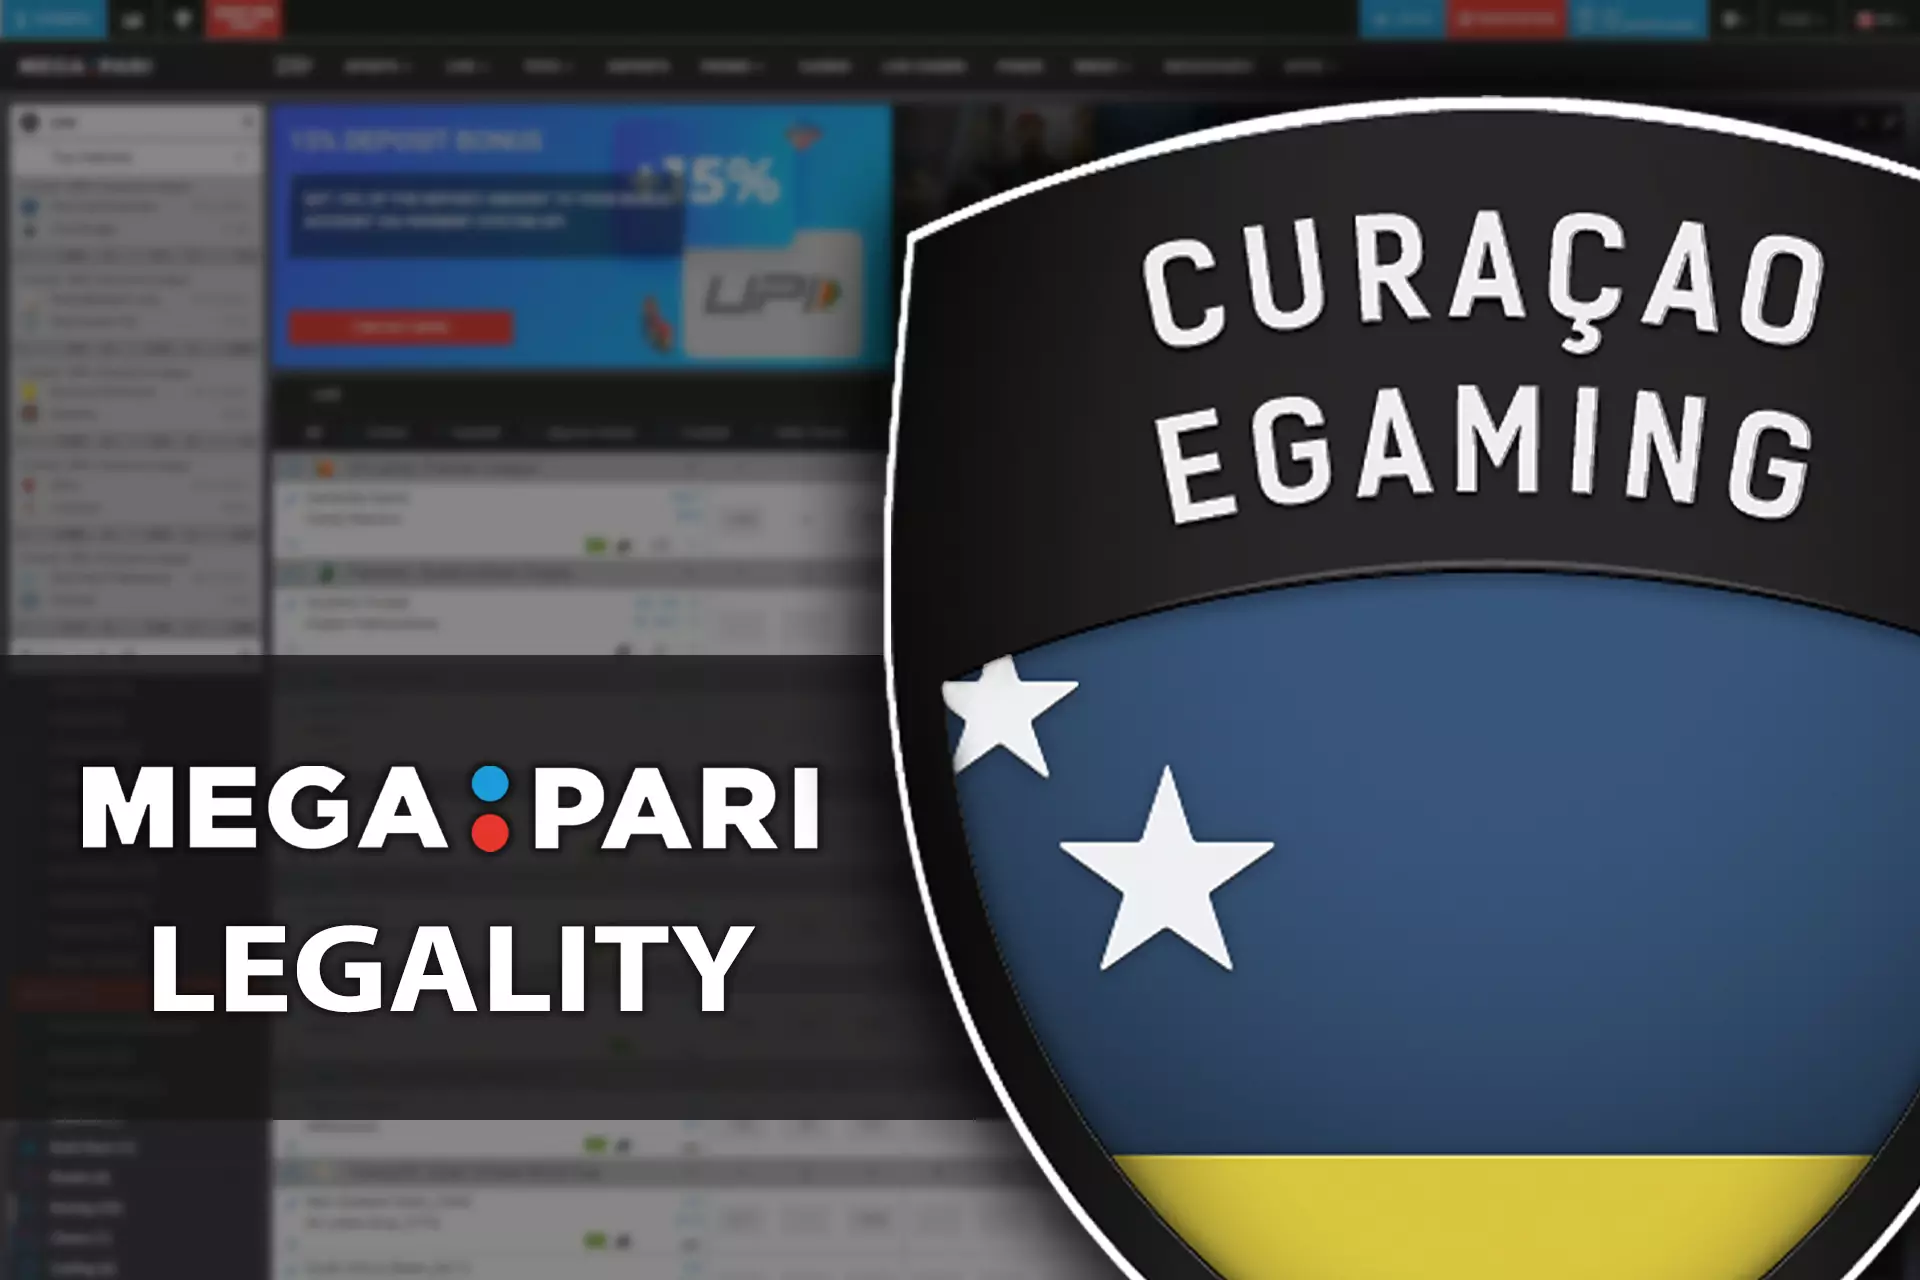 The bookmaker works legally thanking the Curacao Egaming license.